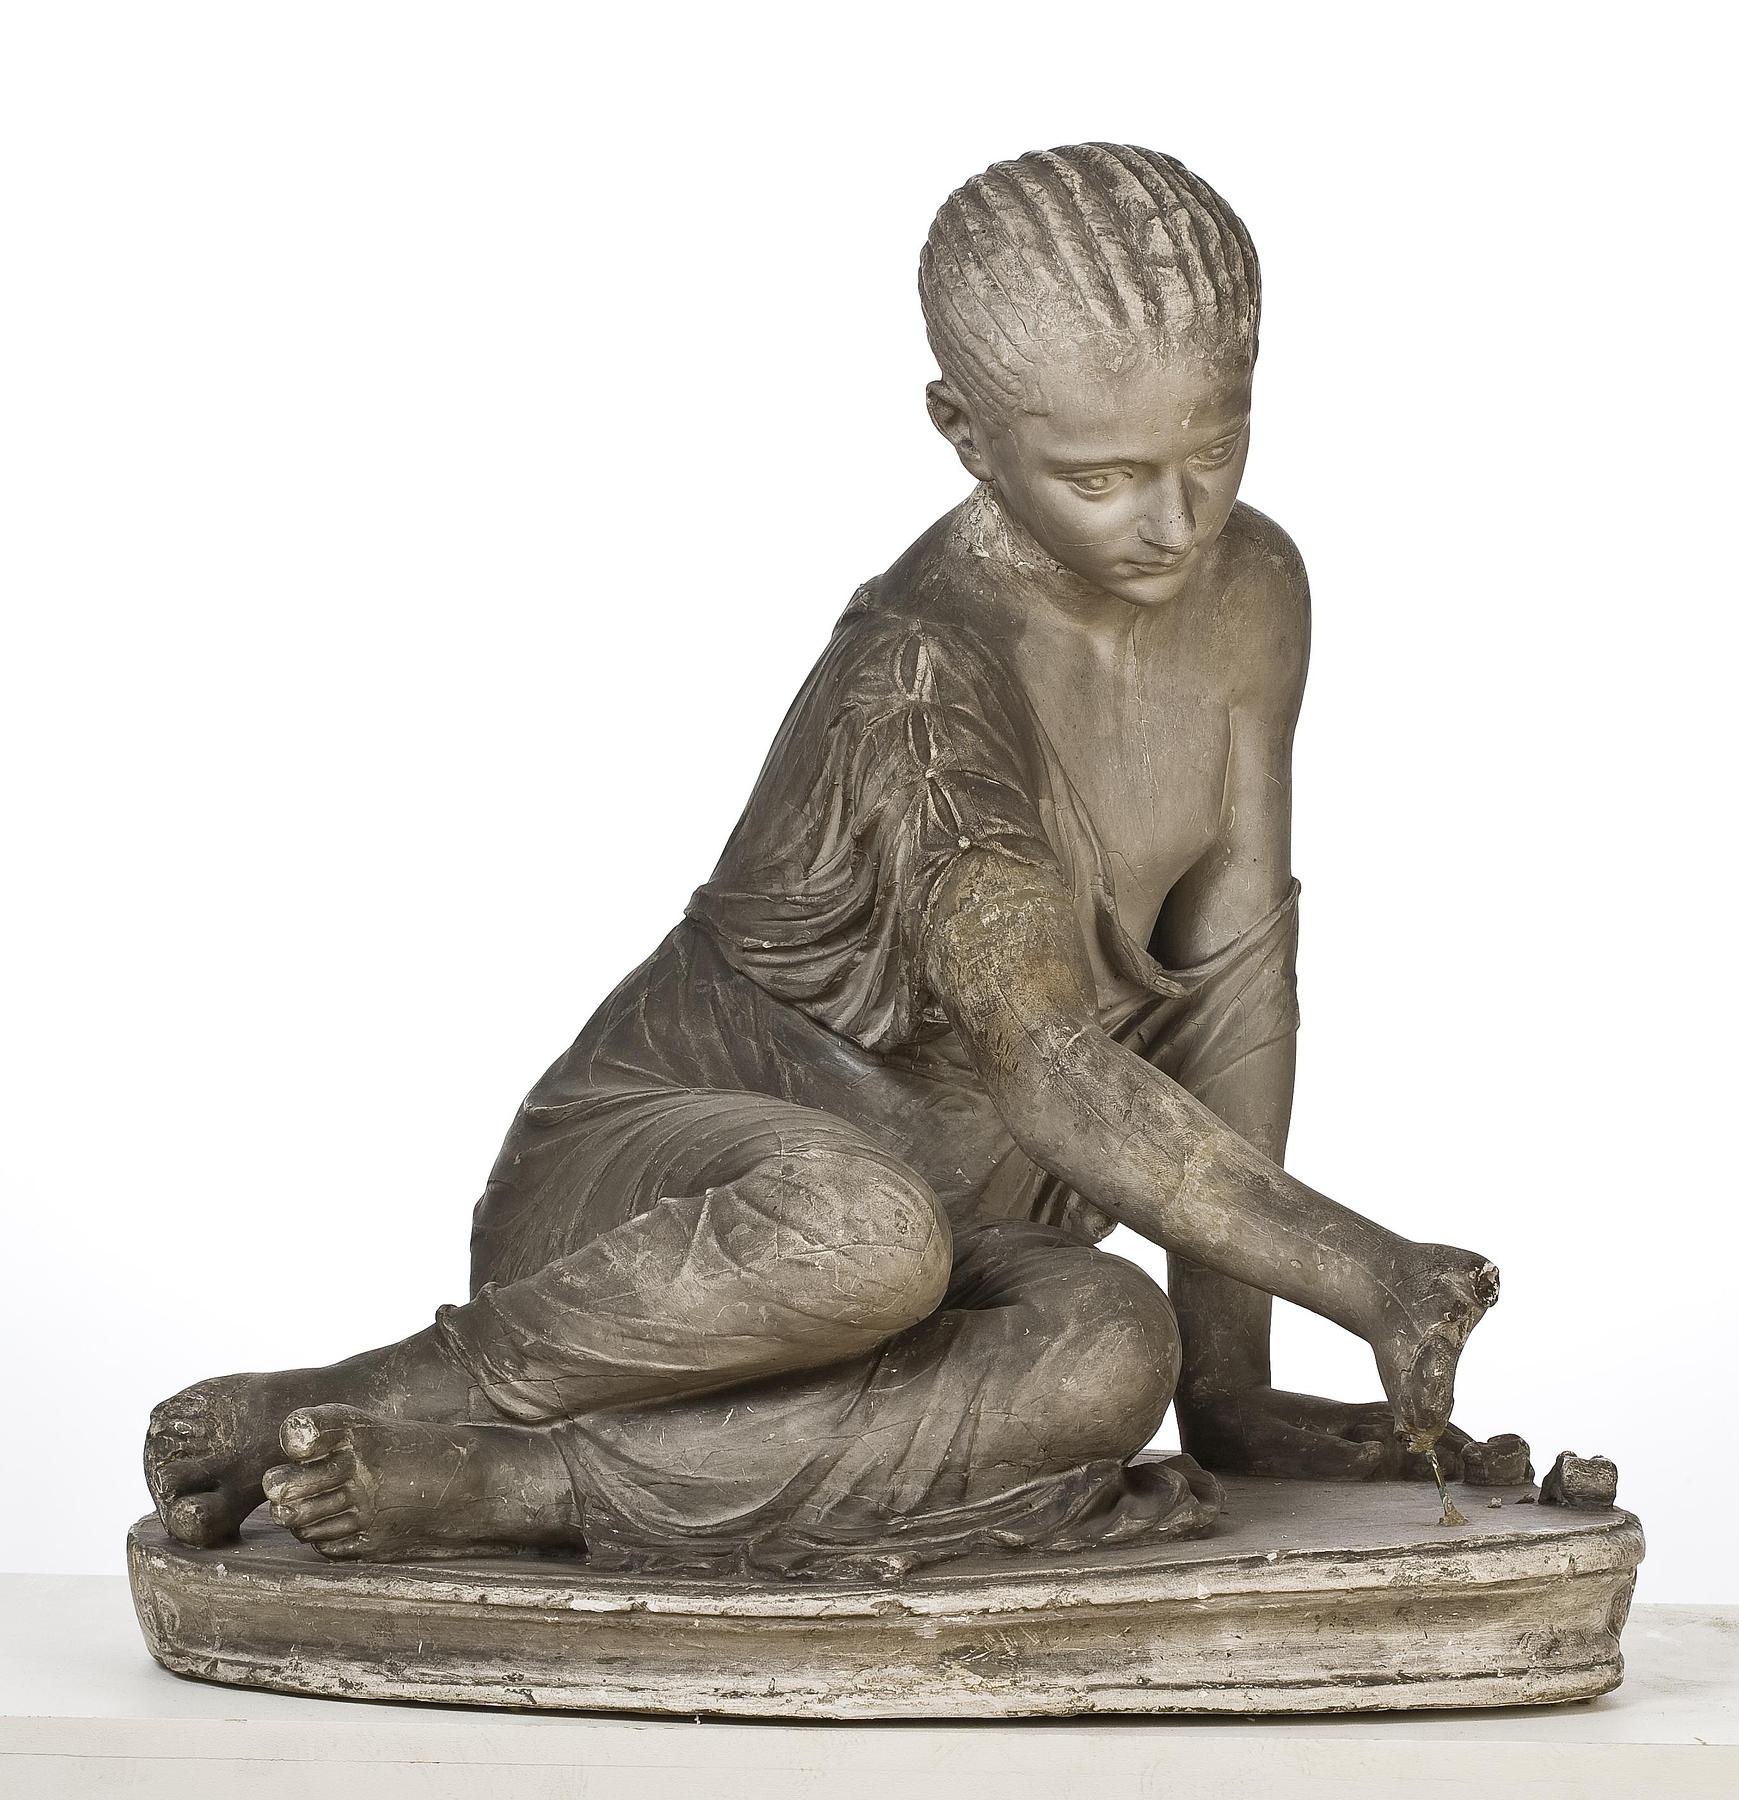 Girl playing with astragals, L50